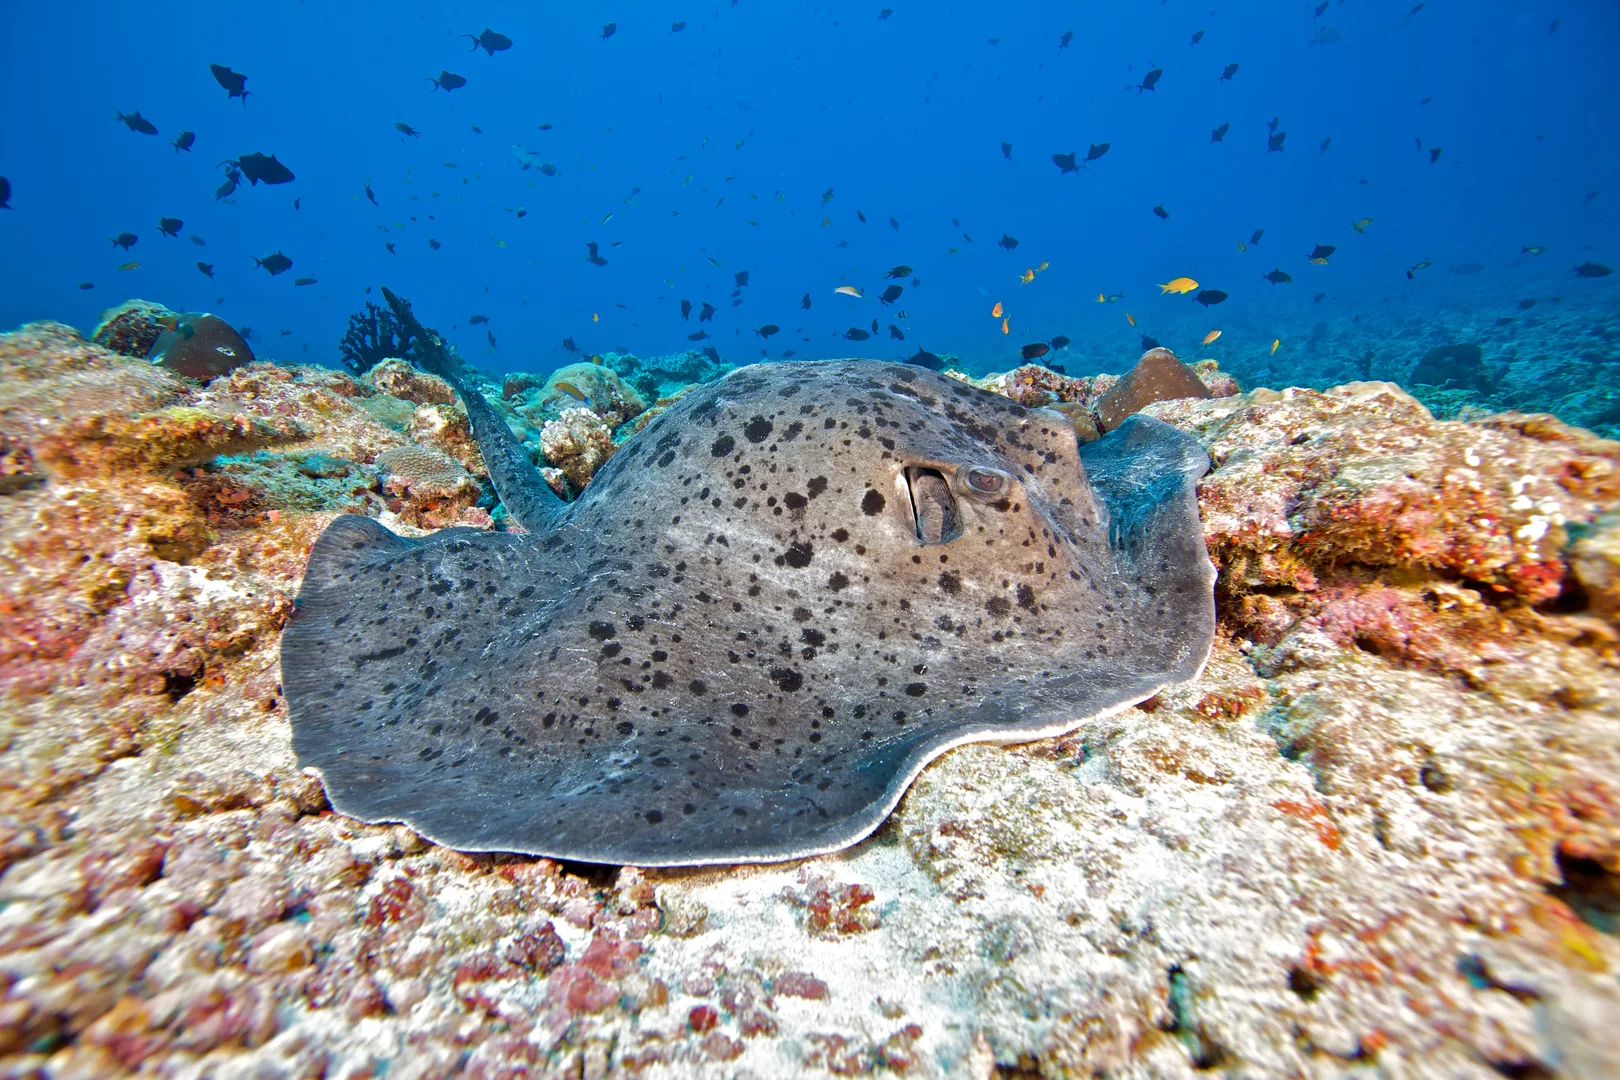 A large Stingray resting on the sea bottom